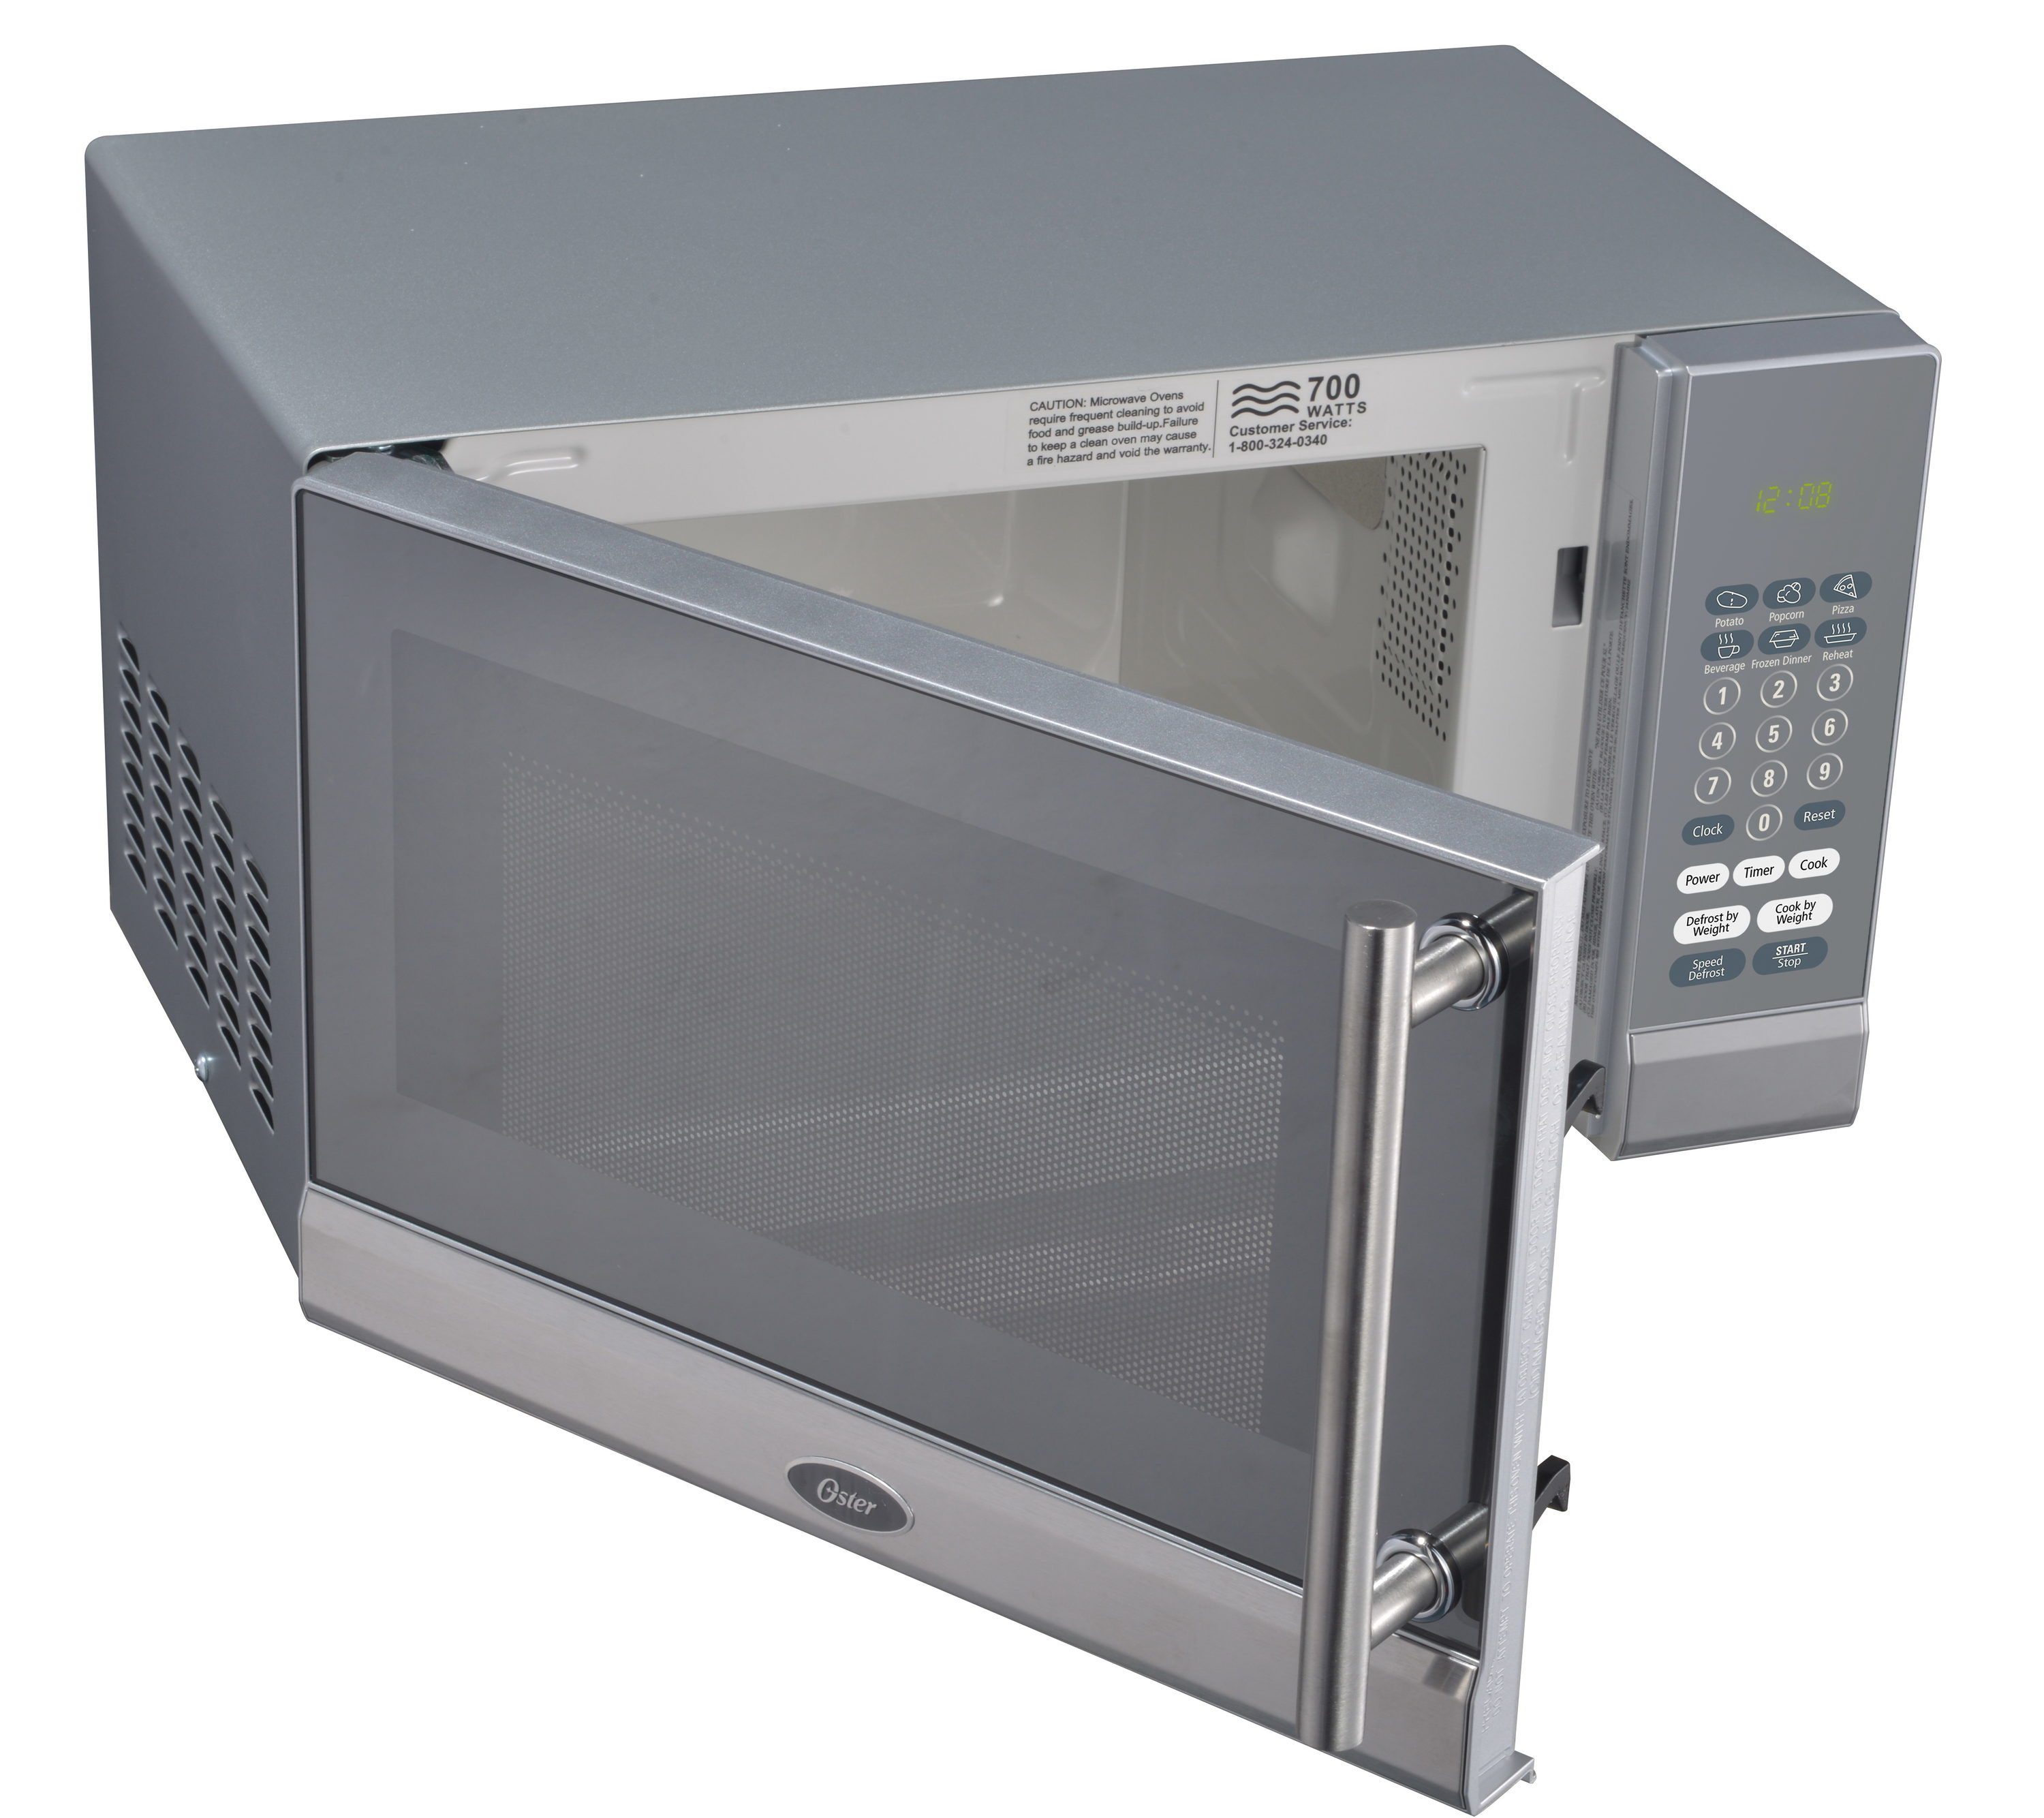 .com: Oster OGZD0701 Microwave Oven, 0.7 cu ft, Stainless